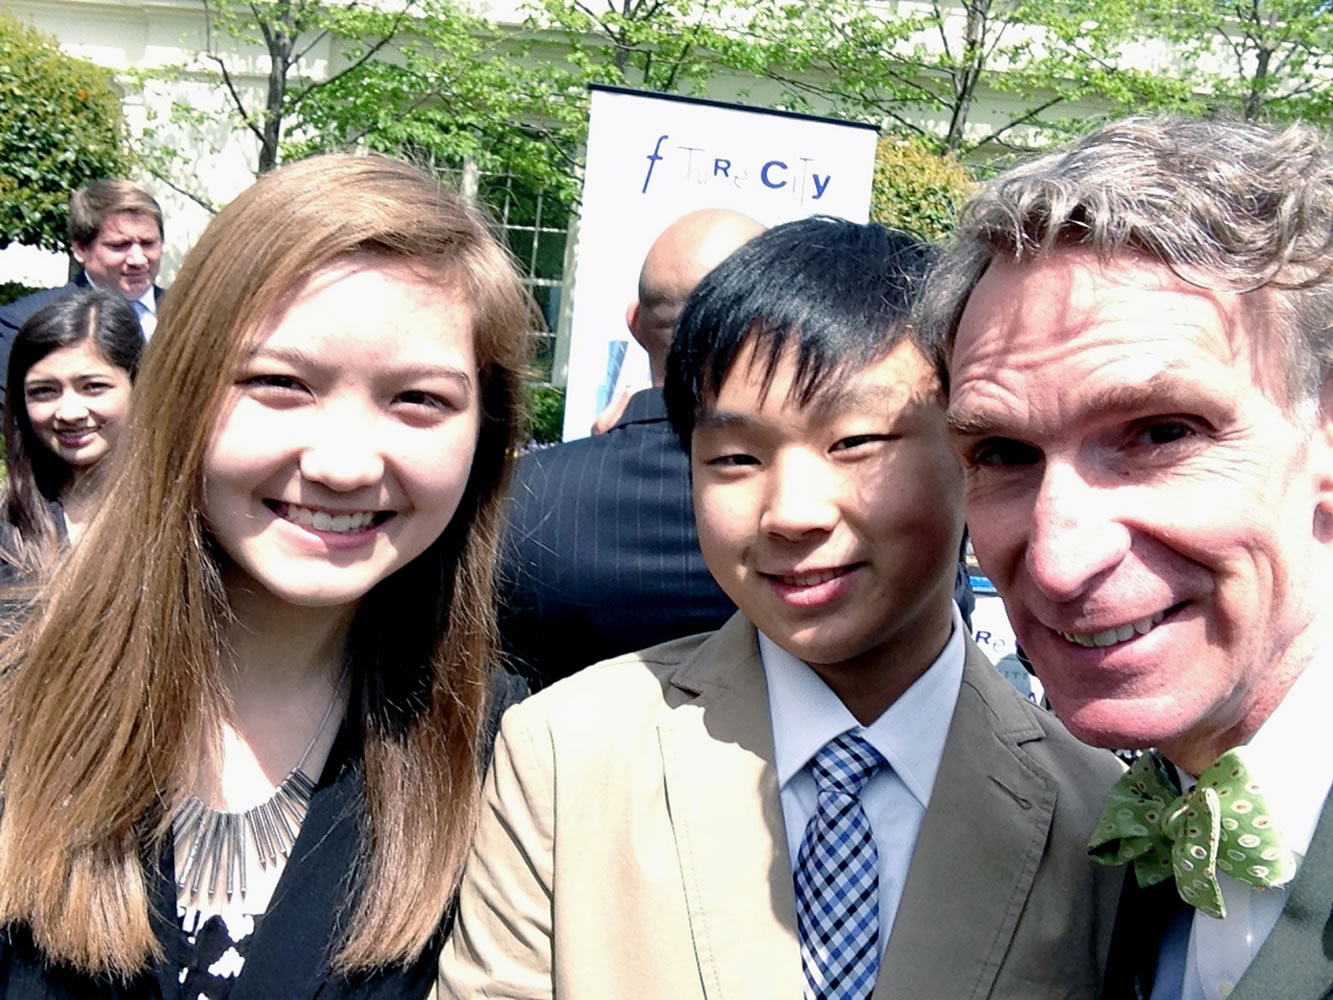 Fisher-Mill Plain: Union High School freshmen Sydney Wallace, left, and Austin Jang, center, are greeted by science educator and TV host Bill Nye the Science Guy at the White House Science Fair on April 22.